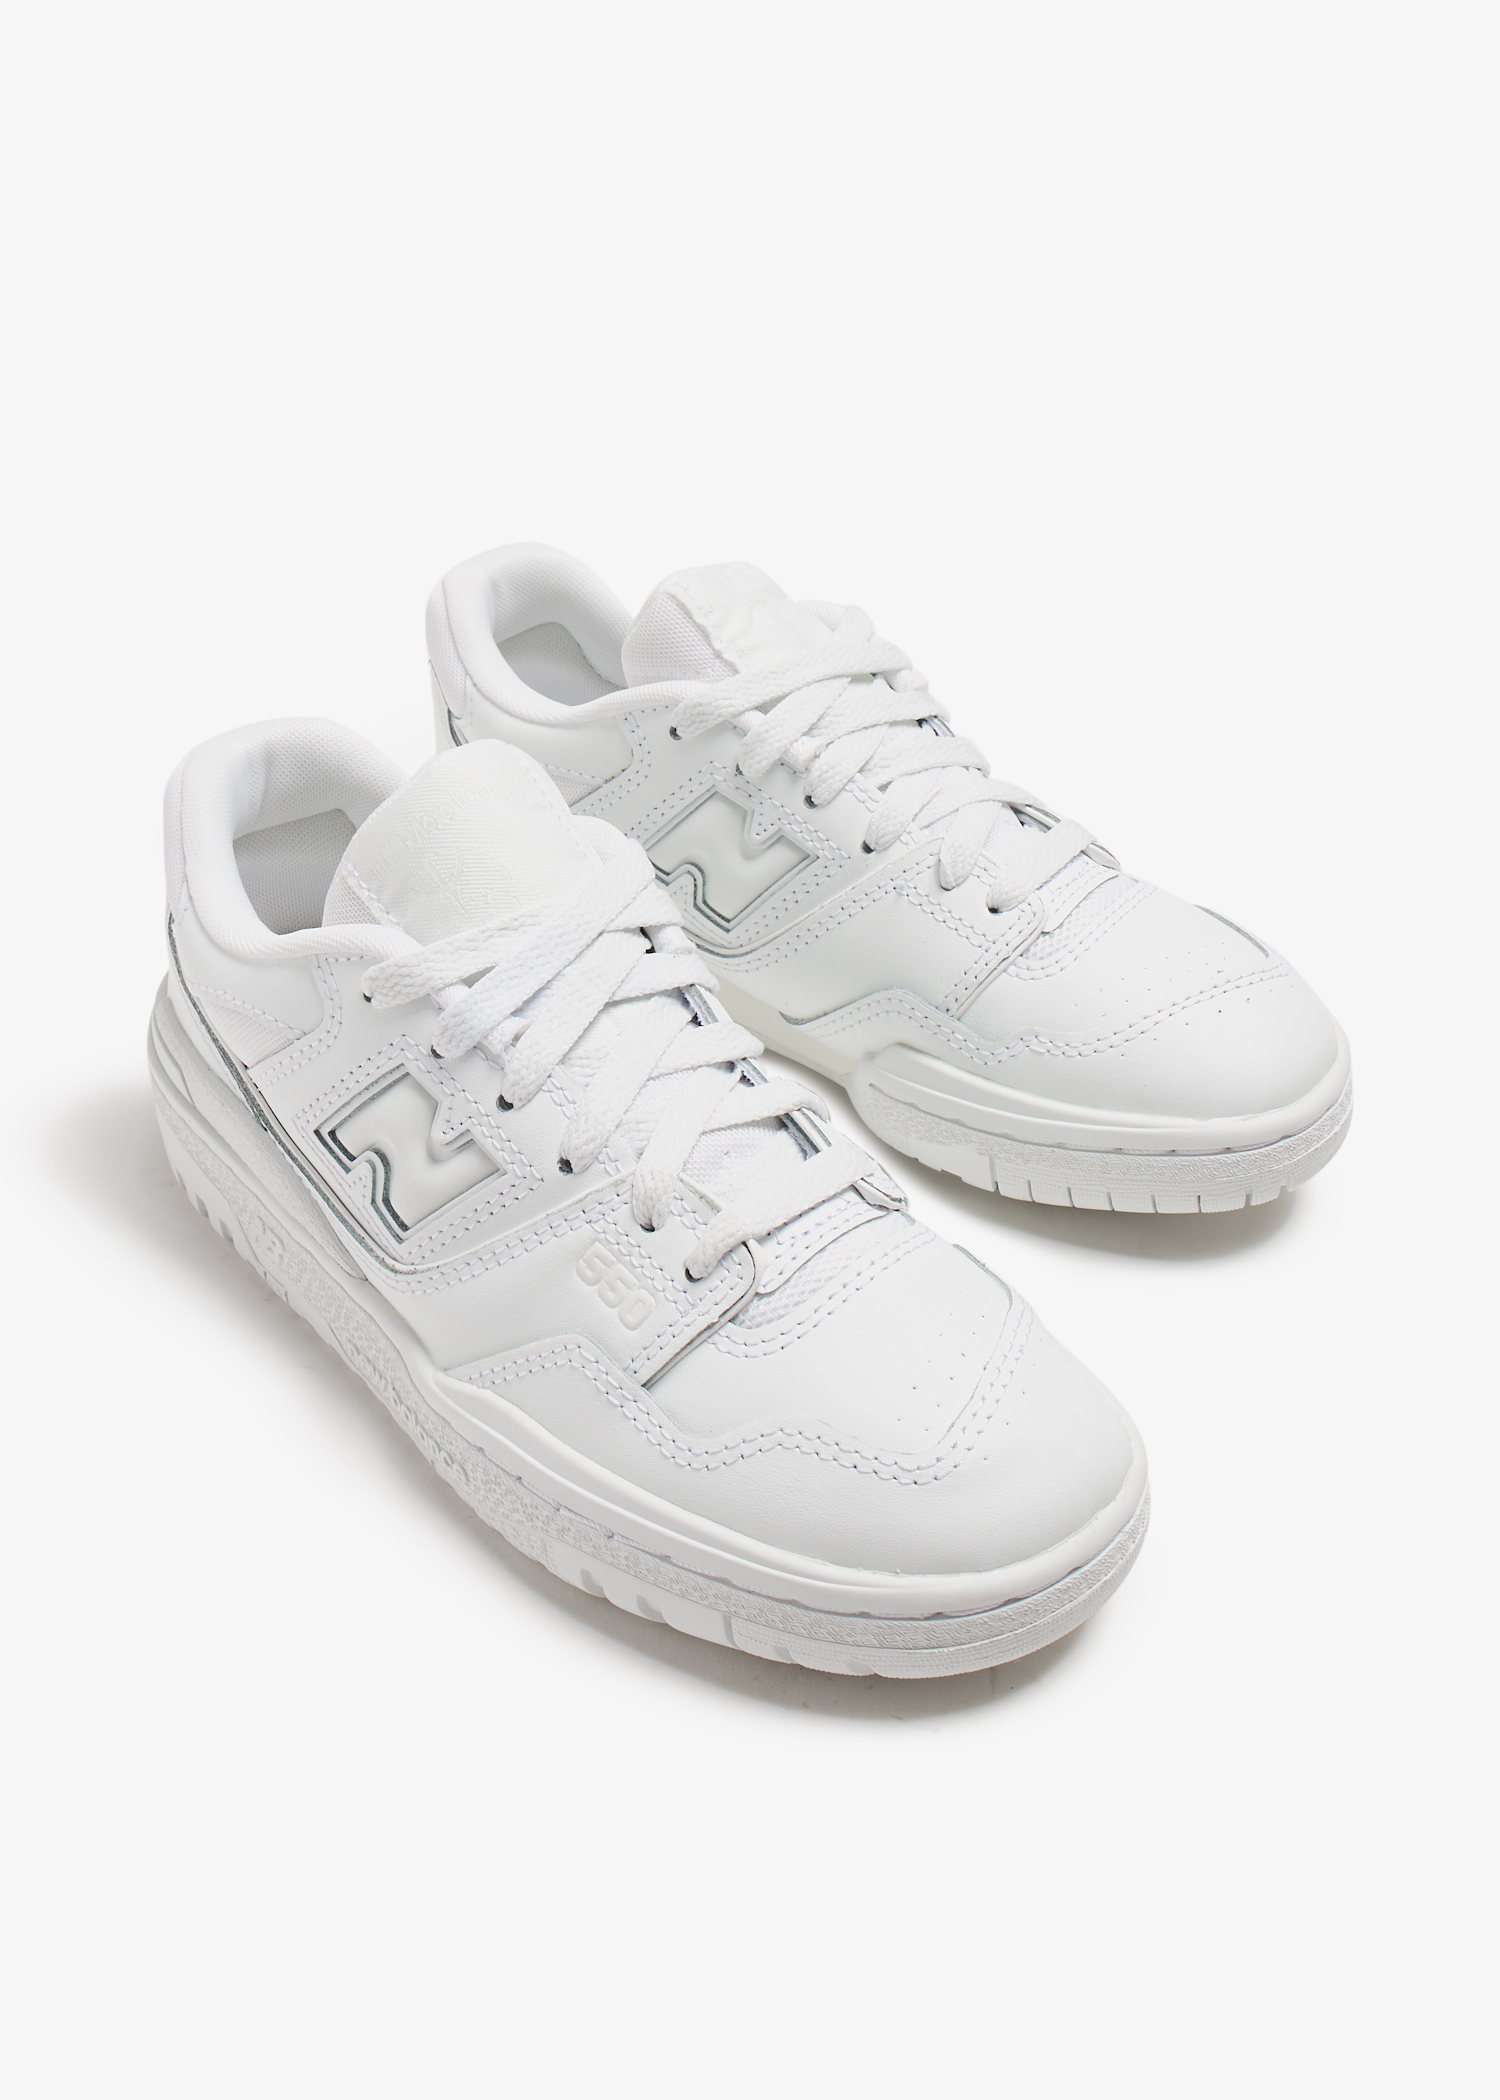 New Balance BB550 sneakers for Boy - White in UAE | Level Shoes